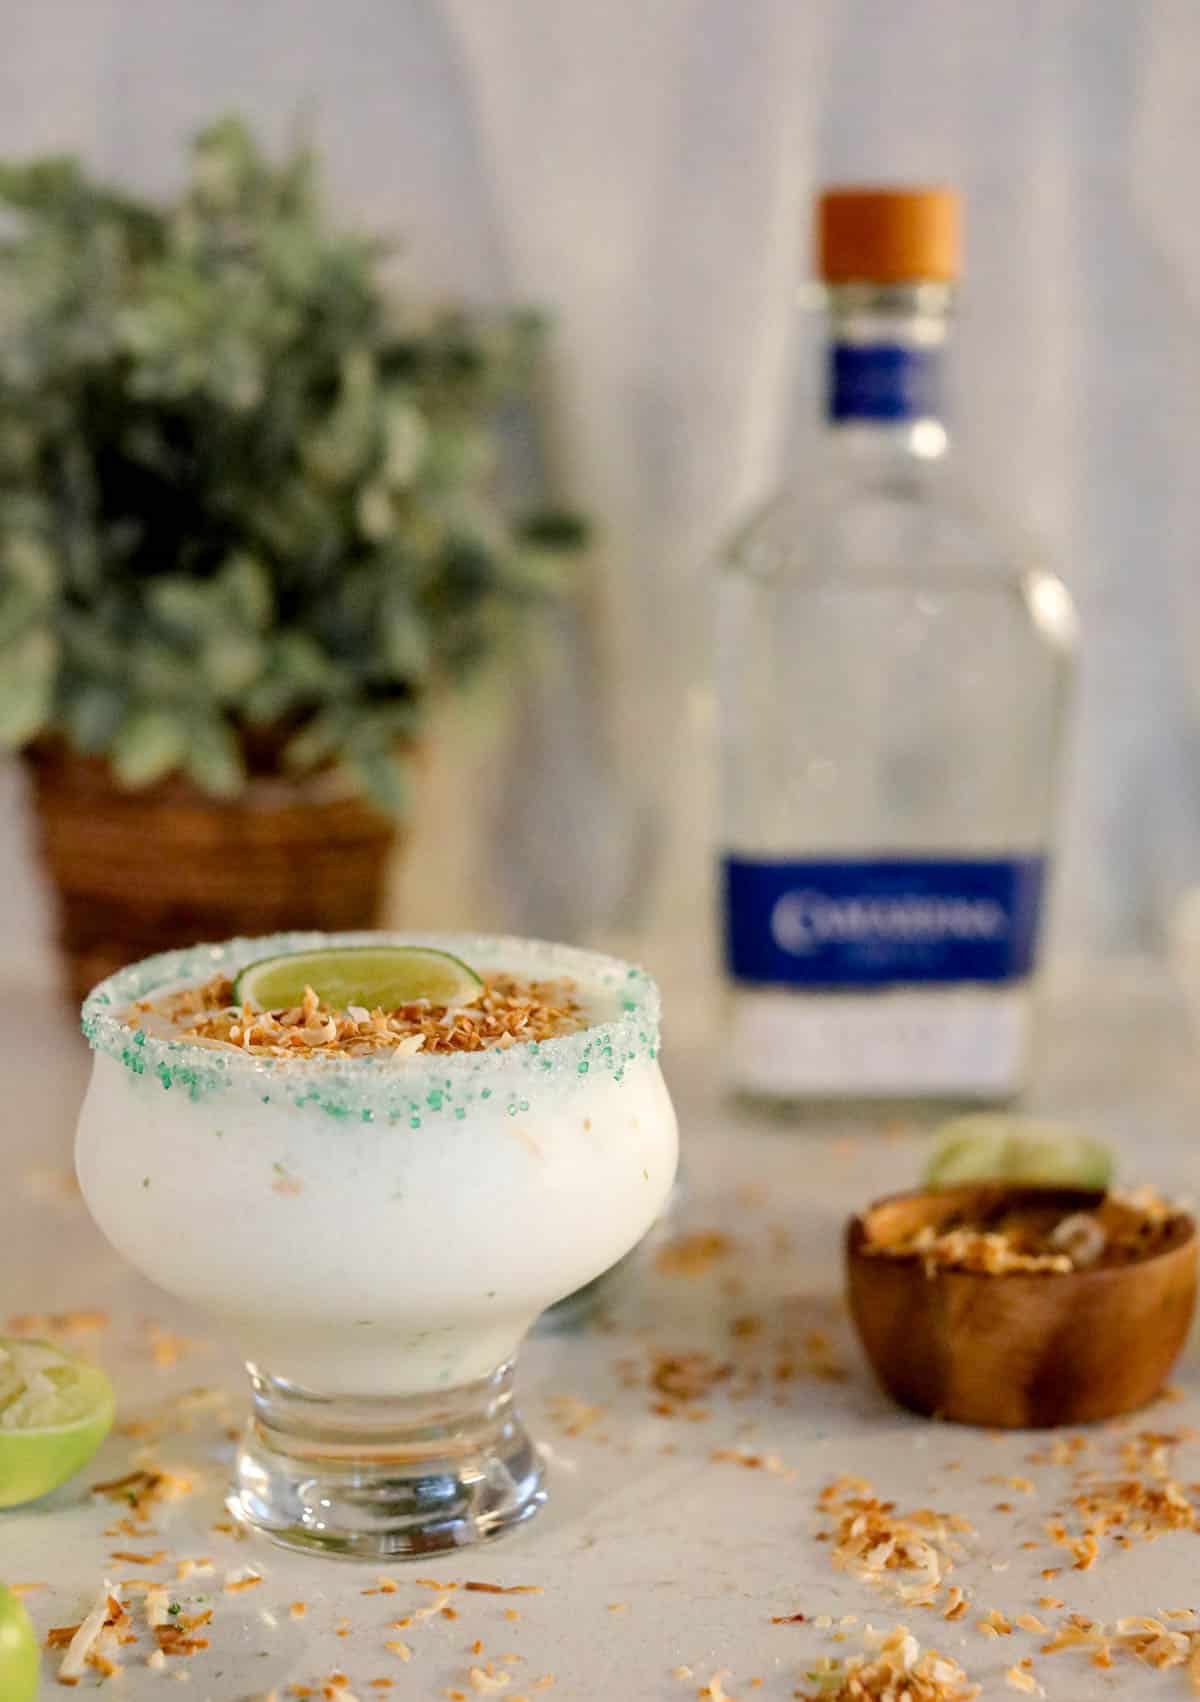 White frozen liquid in a glass with green sugar around the rim with limes and toasted coconut on the beige counter.